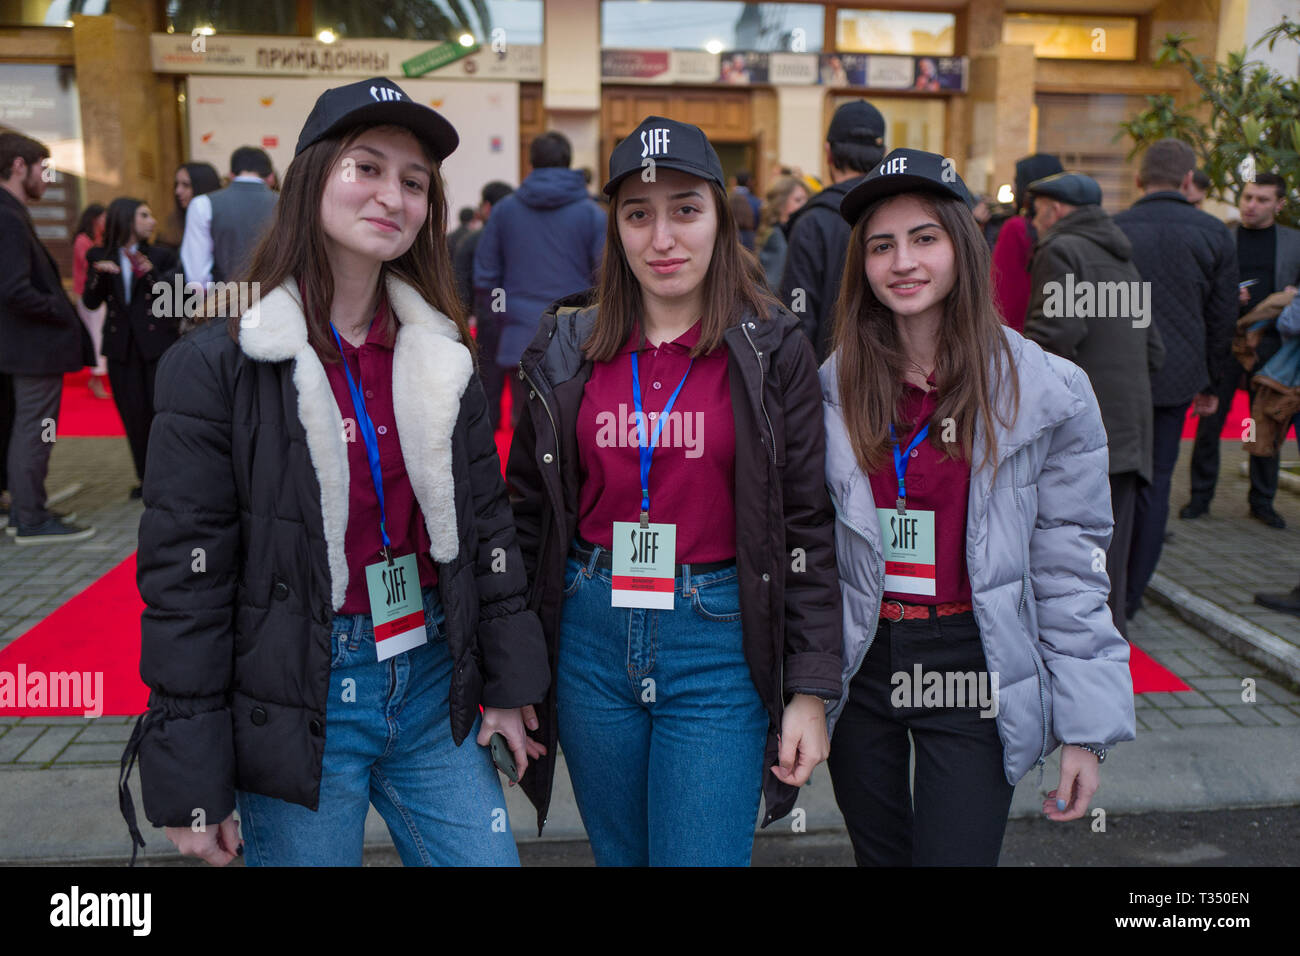 Sukhum, Abkhazia. April 4, 2019 - Sukhum, Republic of Abkhazia - II Sukhum International Film Festival (SIFF) is held in Abkhazian capital from 4 to 8 of April. The program consists of short fiction films lasting from 10 to 30 minutes. The festival's competition program will feature 30 short films from Abkhazia, Russia, Europe, the Middle East and North Africa. Films will compete in the nominations ''Best Acting'', ''Best Screenplay'', ''Best Film'', ''Best Director's Work.'' The organizer of the Sukhum International Film Festival is the State Committee on Youth Policy of the Republic of Abkha Stock Photo